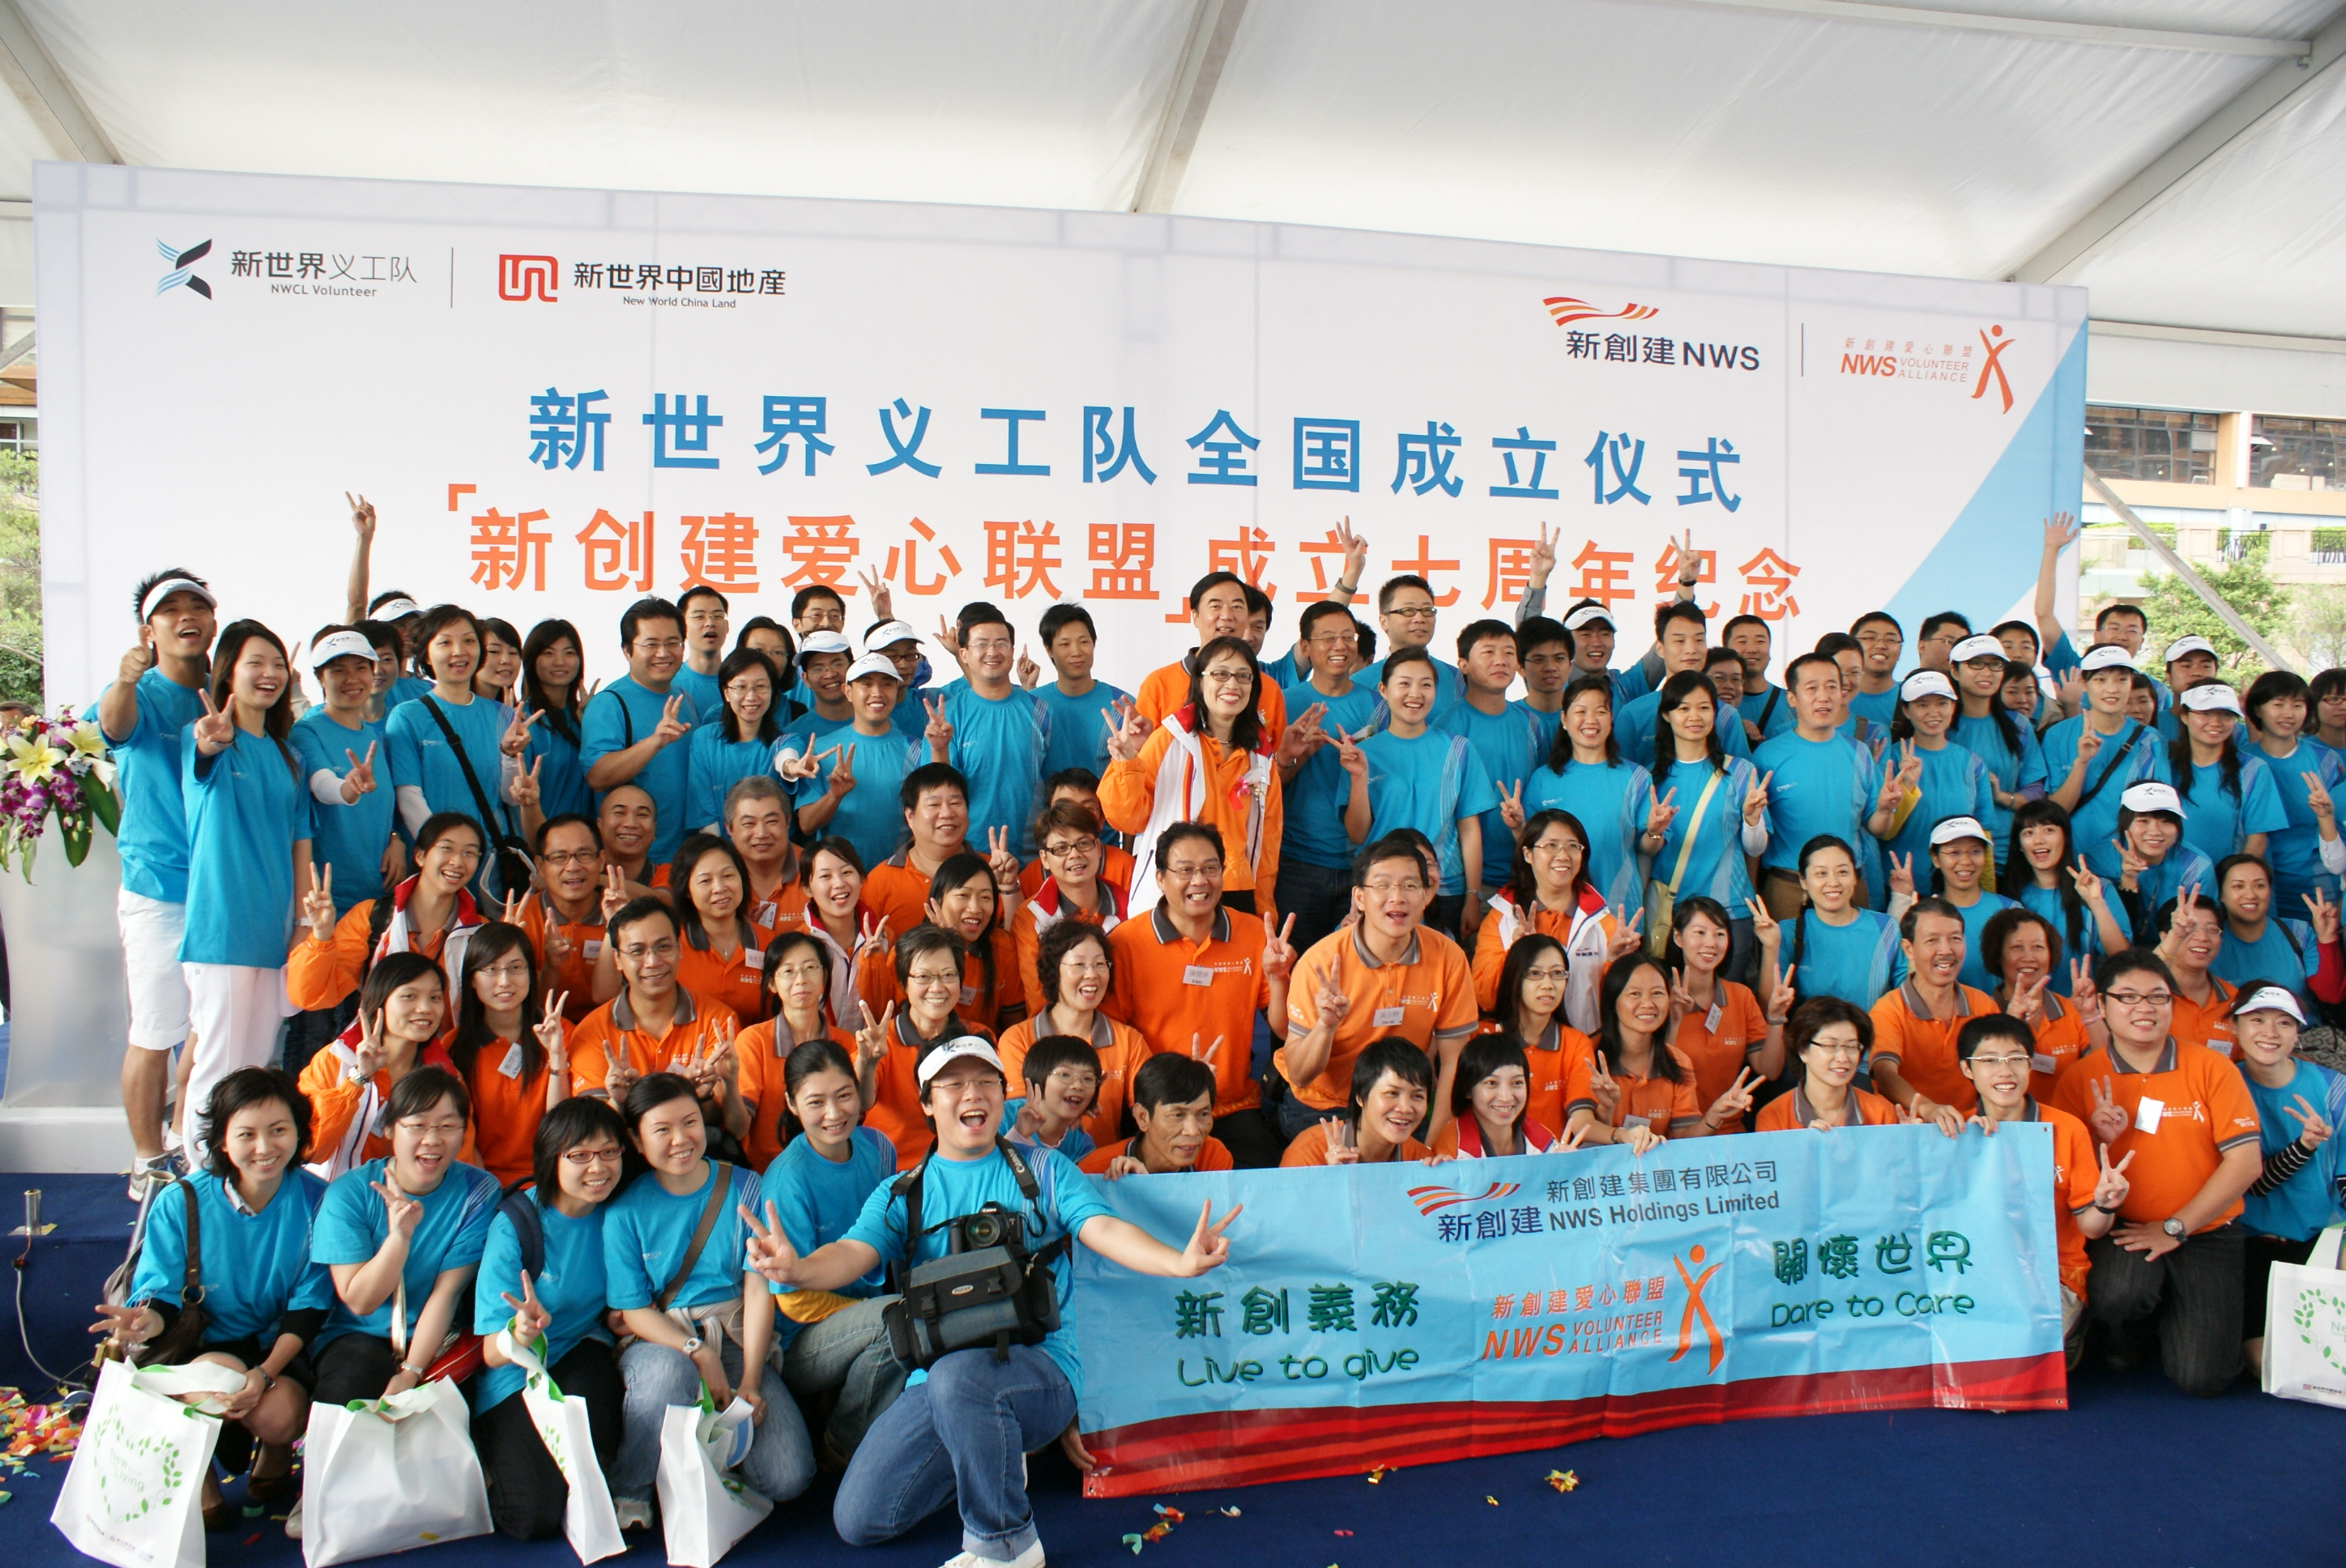 NWS Volunteer Alliance celebrated its 7th anniversary by sending love to Guangzhou with New World China Land Volunteer